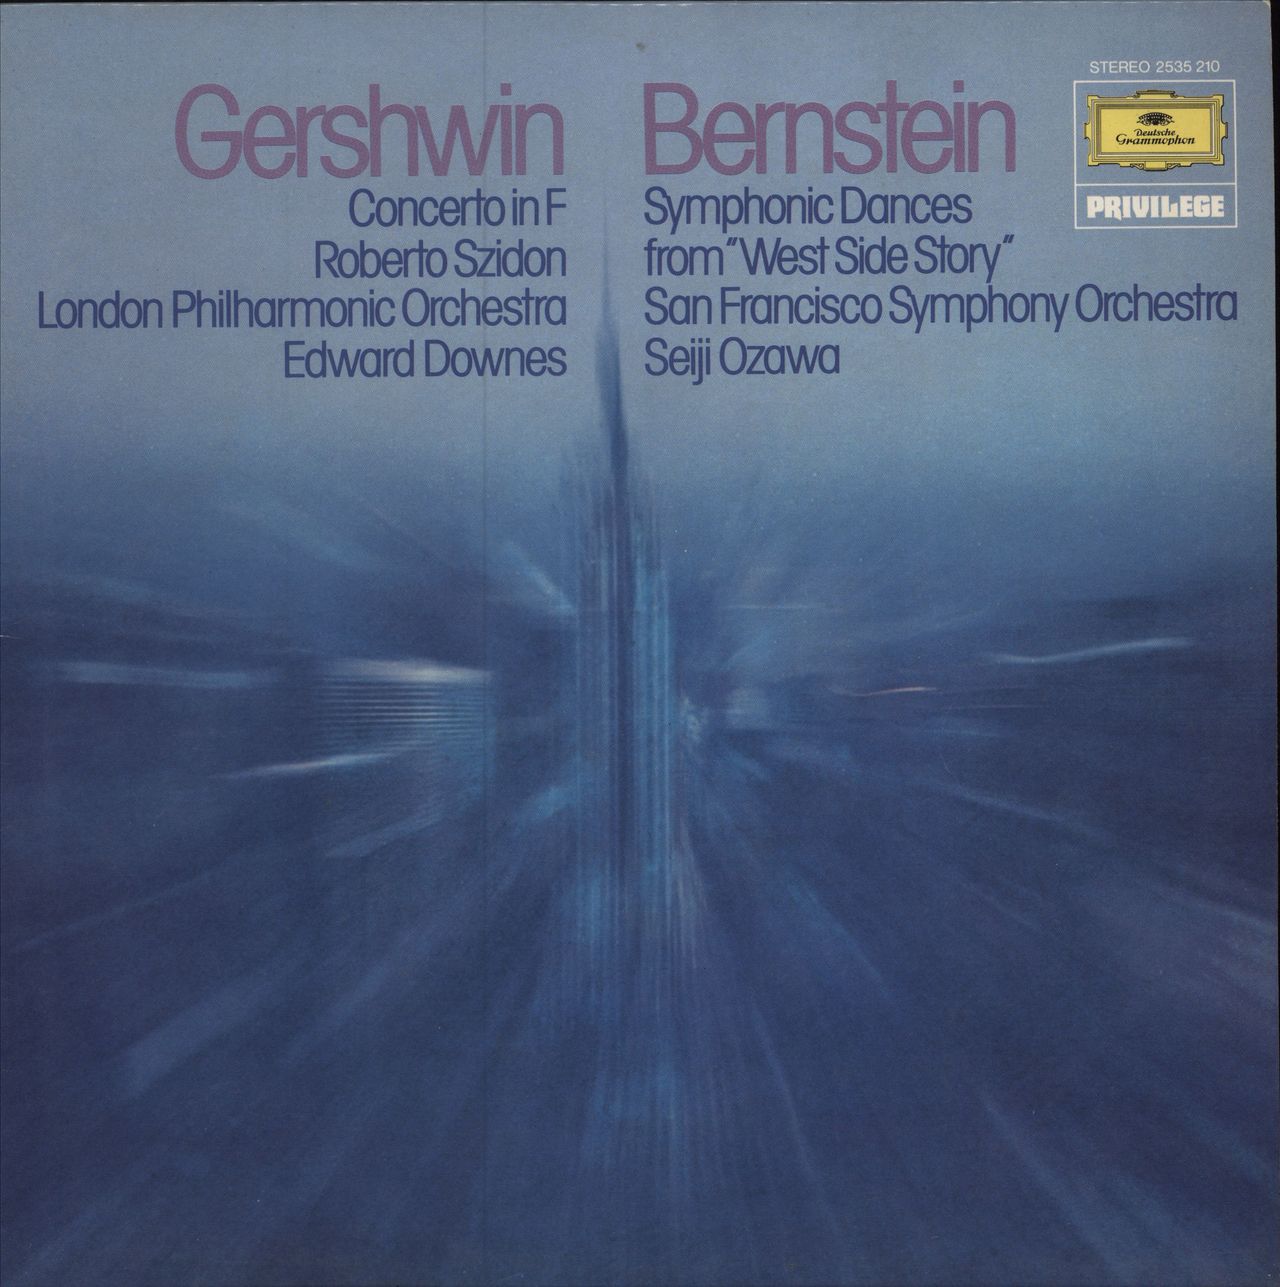 Various-Classical & Orchestral Gershwin: Concerto In F / Bernstein: Symphonic Dances From 'West Side Story' UK vinyl LP album (LP record) 2535210